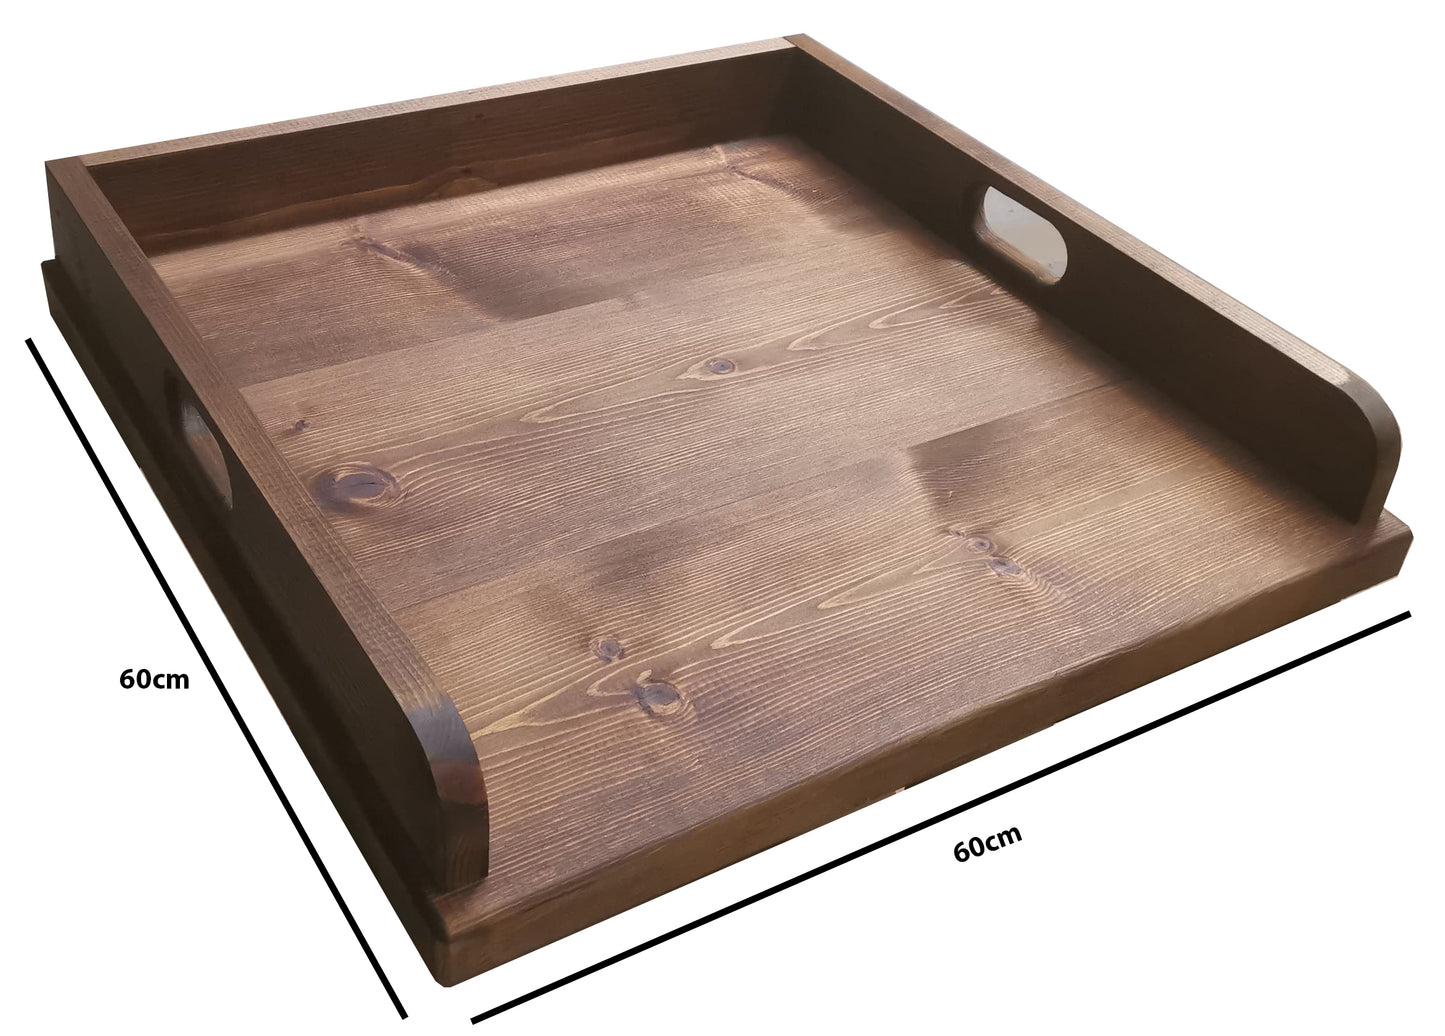 Cooker Cover, Sometimes Called Noodle Tray or Hob Cover. This are Made of Solid Wood and give Some Storage Space for Your Kitchen